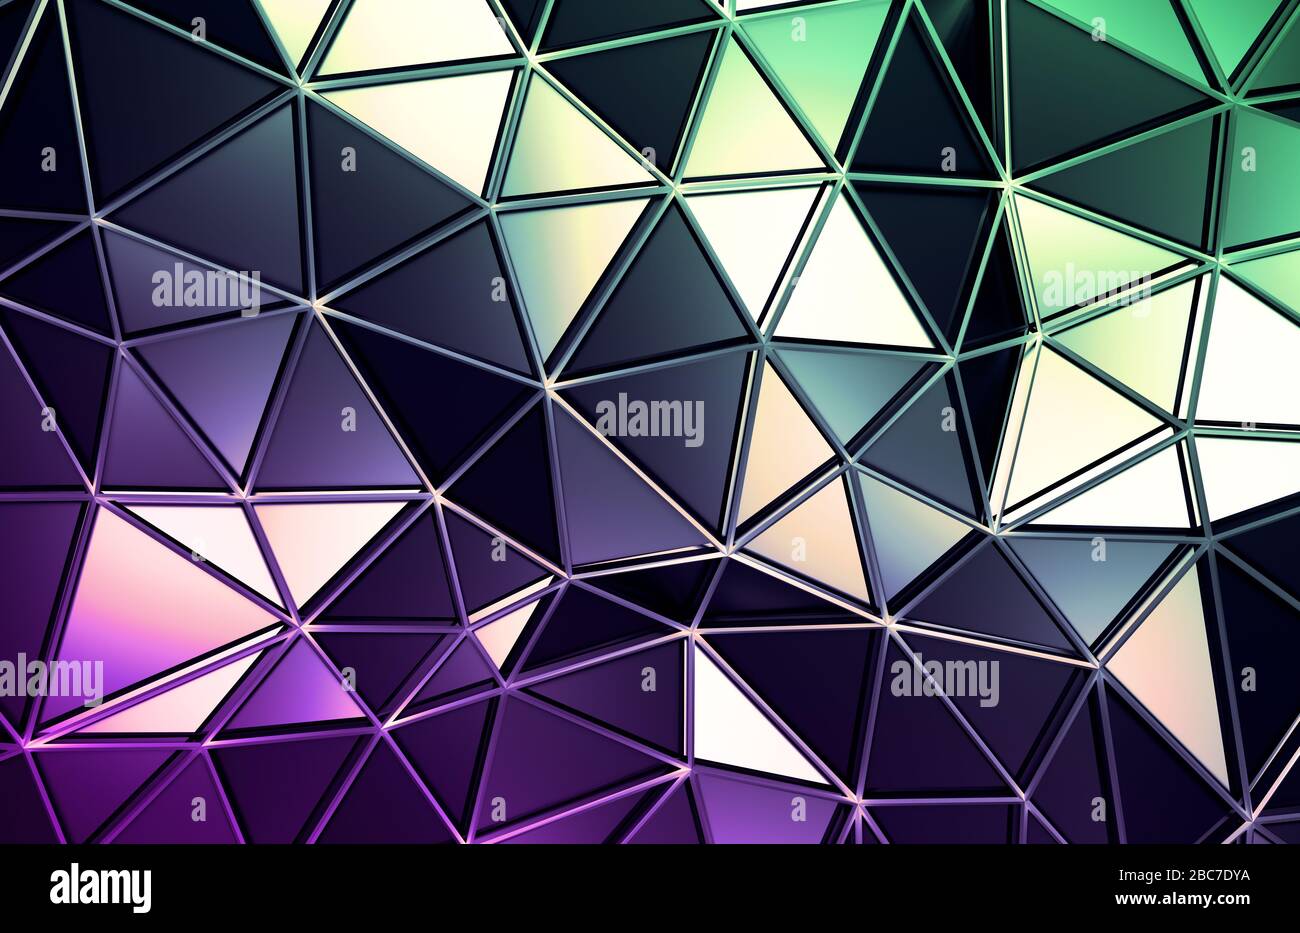 Abstract 3d rendering of triangulated surface. Contemporary background. Futuristic polygonal shape. Distorted low poly backdrop with sharp lines. Stock Photo